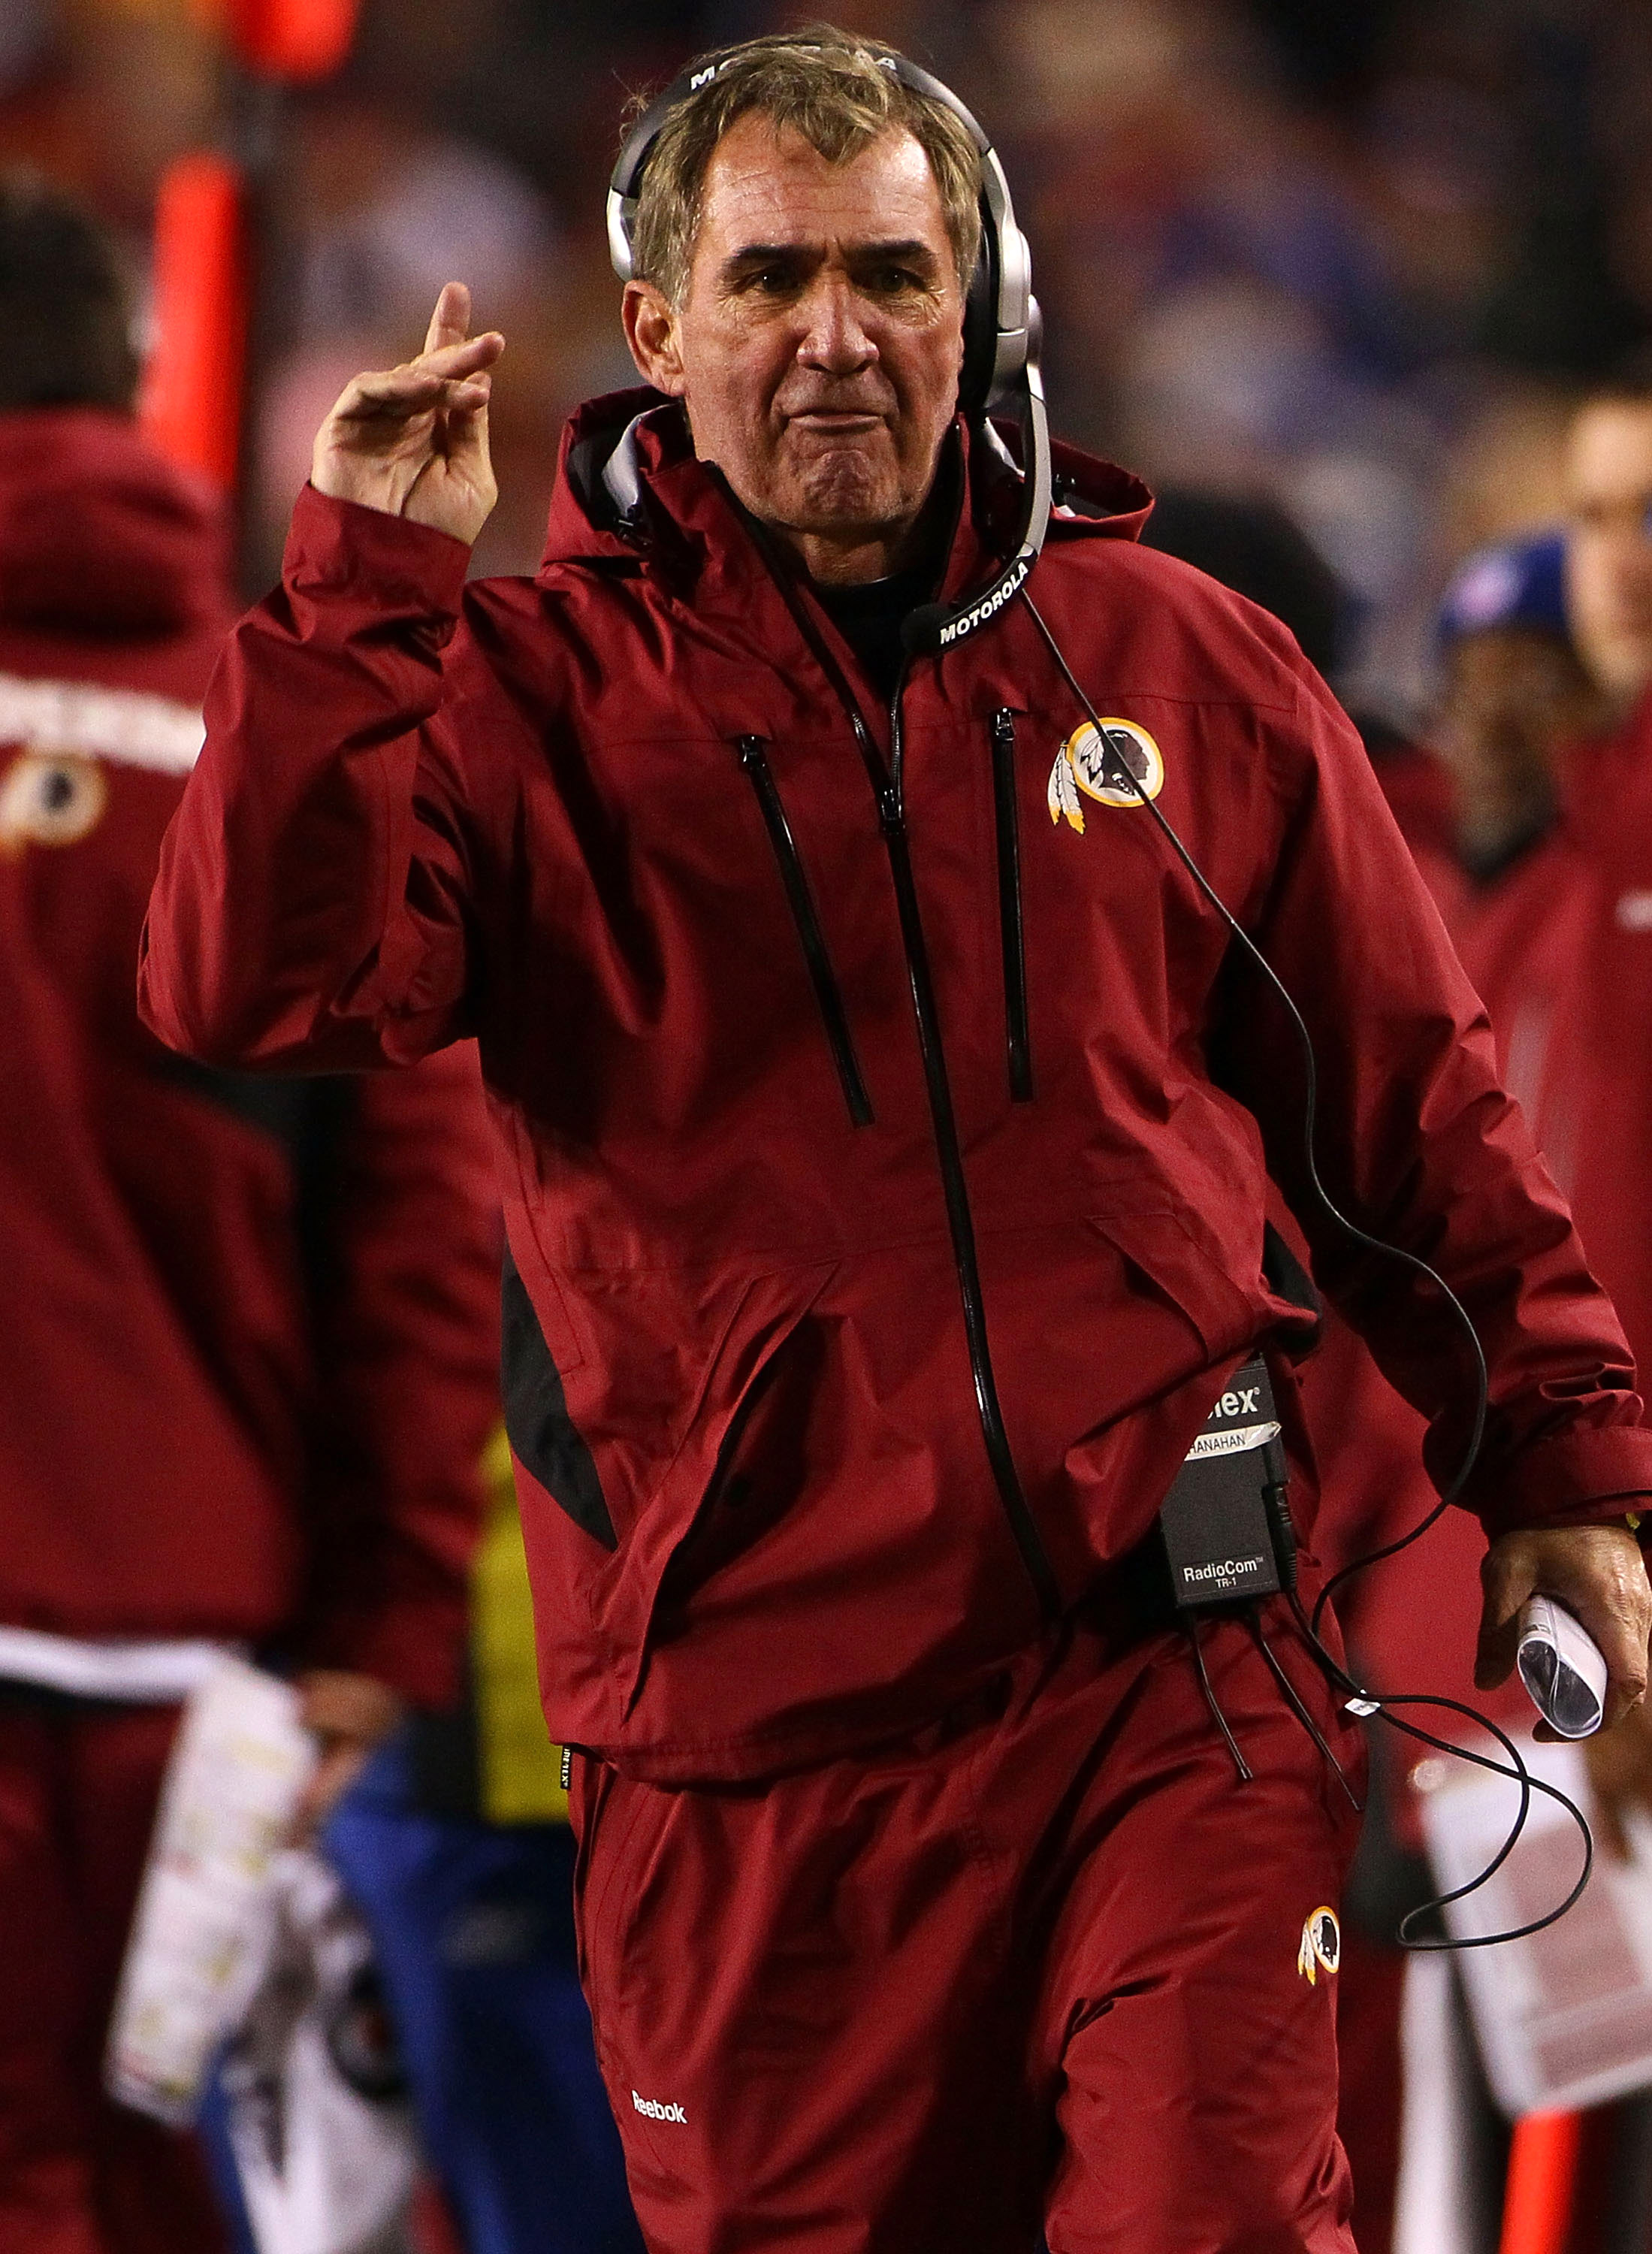 LANDOVER, MD - JANUARY 02:  Washington Redskins head coach Mike Shanahan makes a point with a referee in the fourth quarter of a game against the New York Giants at FedEx Field on January 2, 2011 in Landover, Maryland. The Giants won the game 17-14.  (Pho